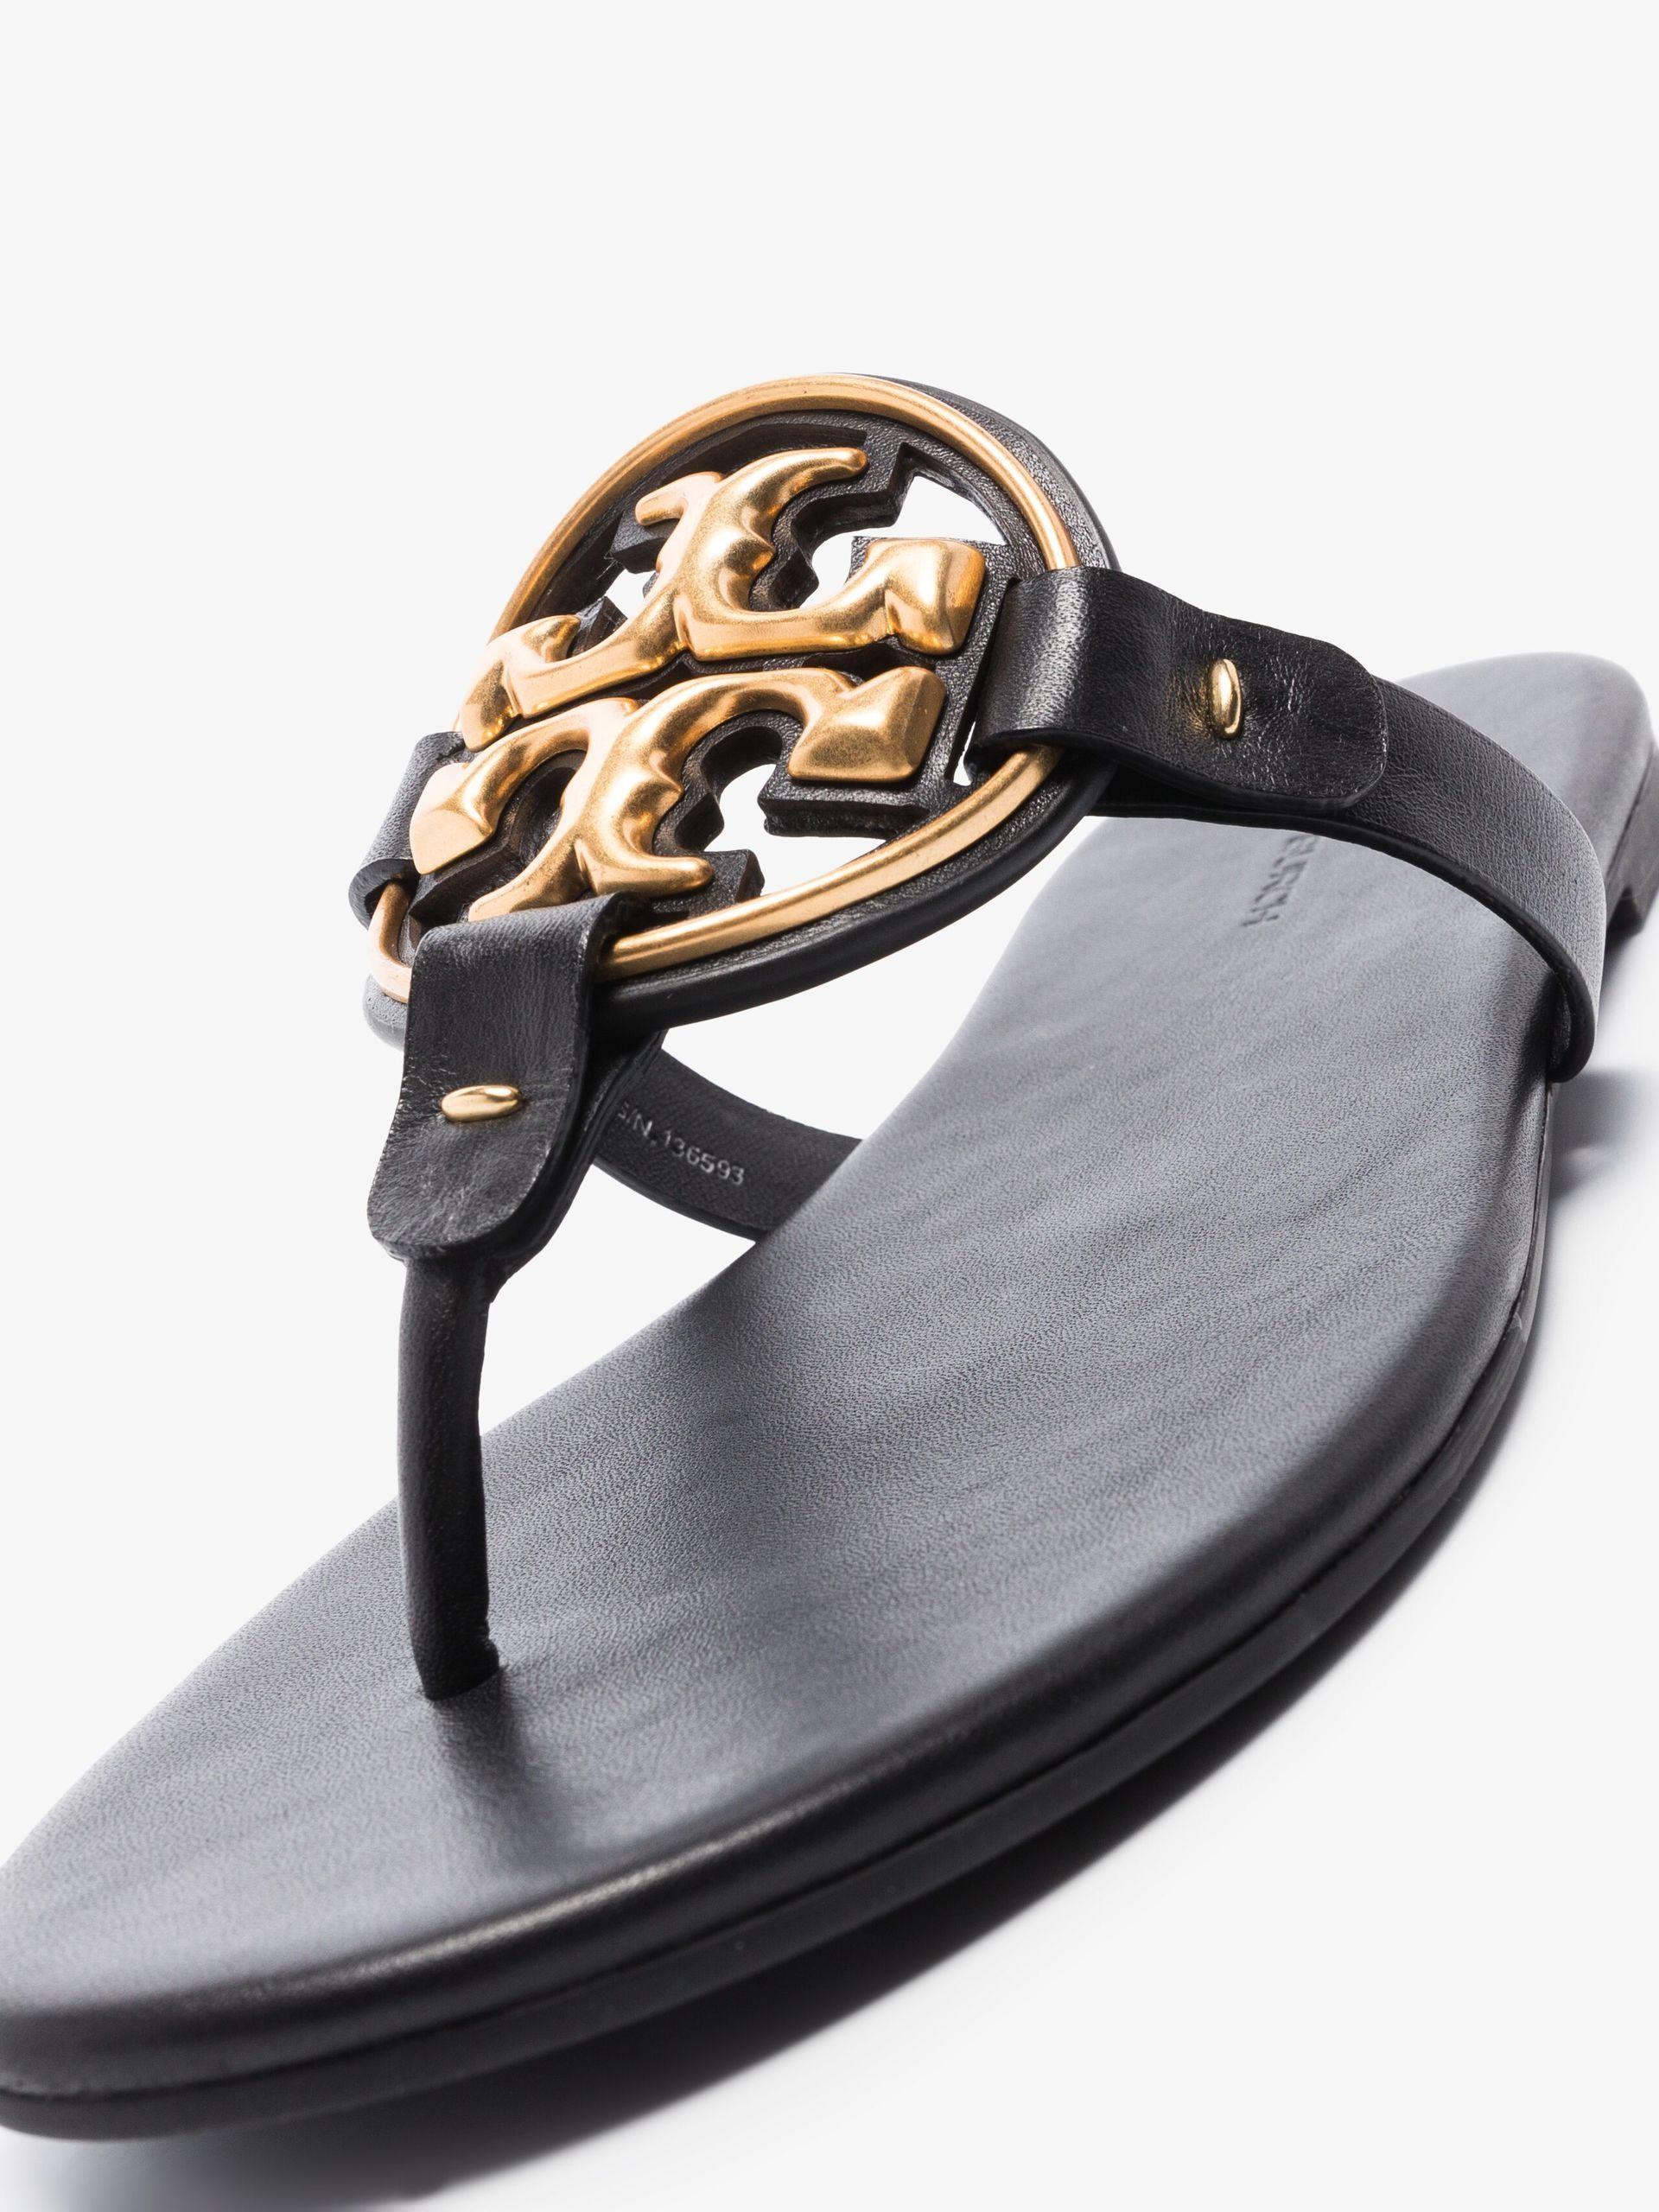 Black - Save 27% Tory Burch Leather Sandal Slider Miller Bombé in Nero Womens Flats and flat shoes Tory Burch Flats and flat shoes 